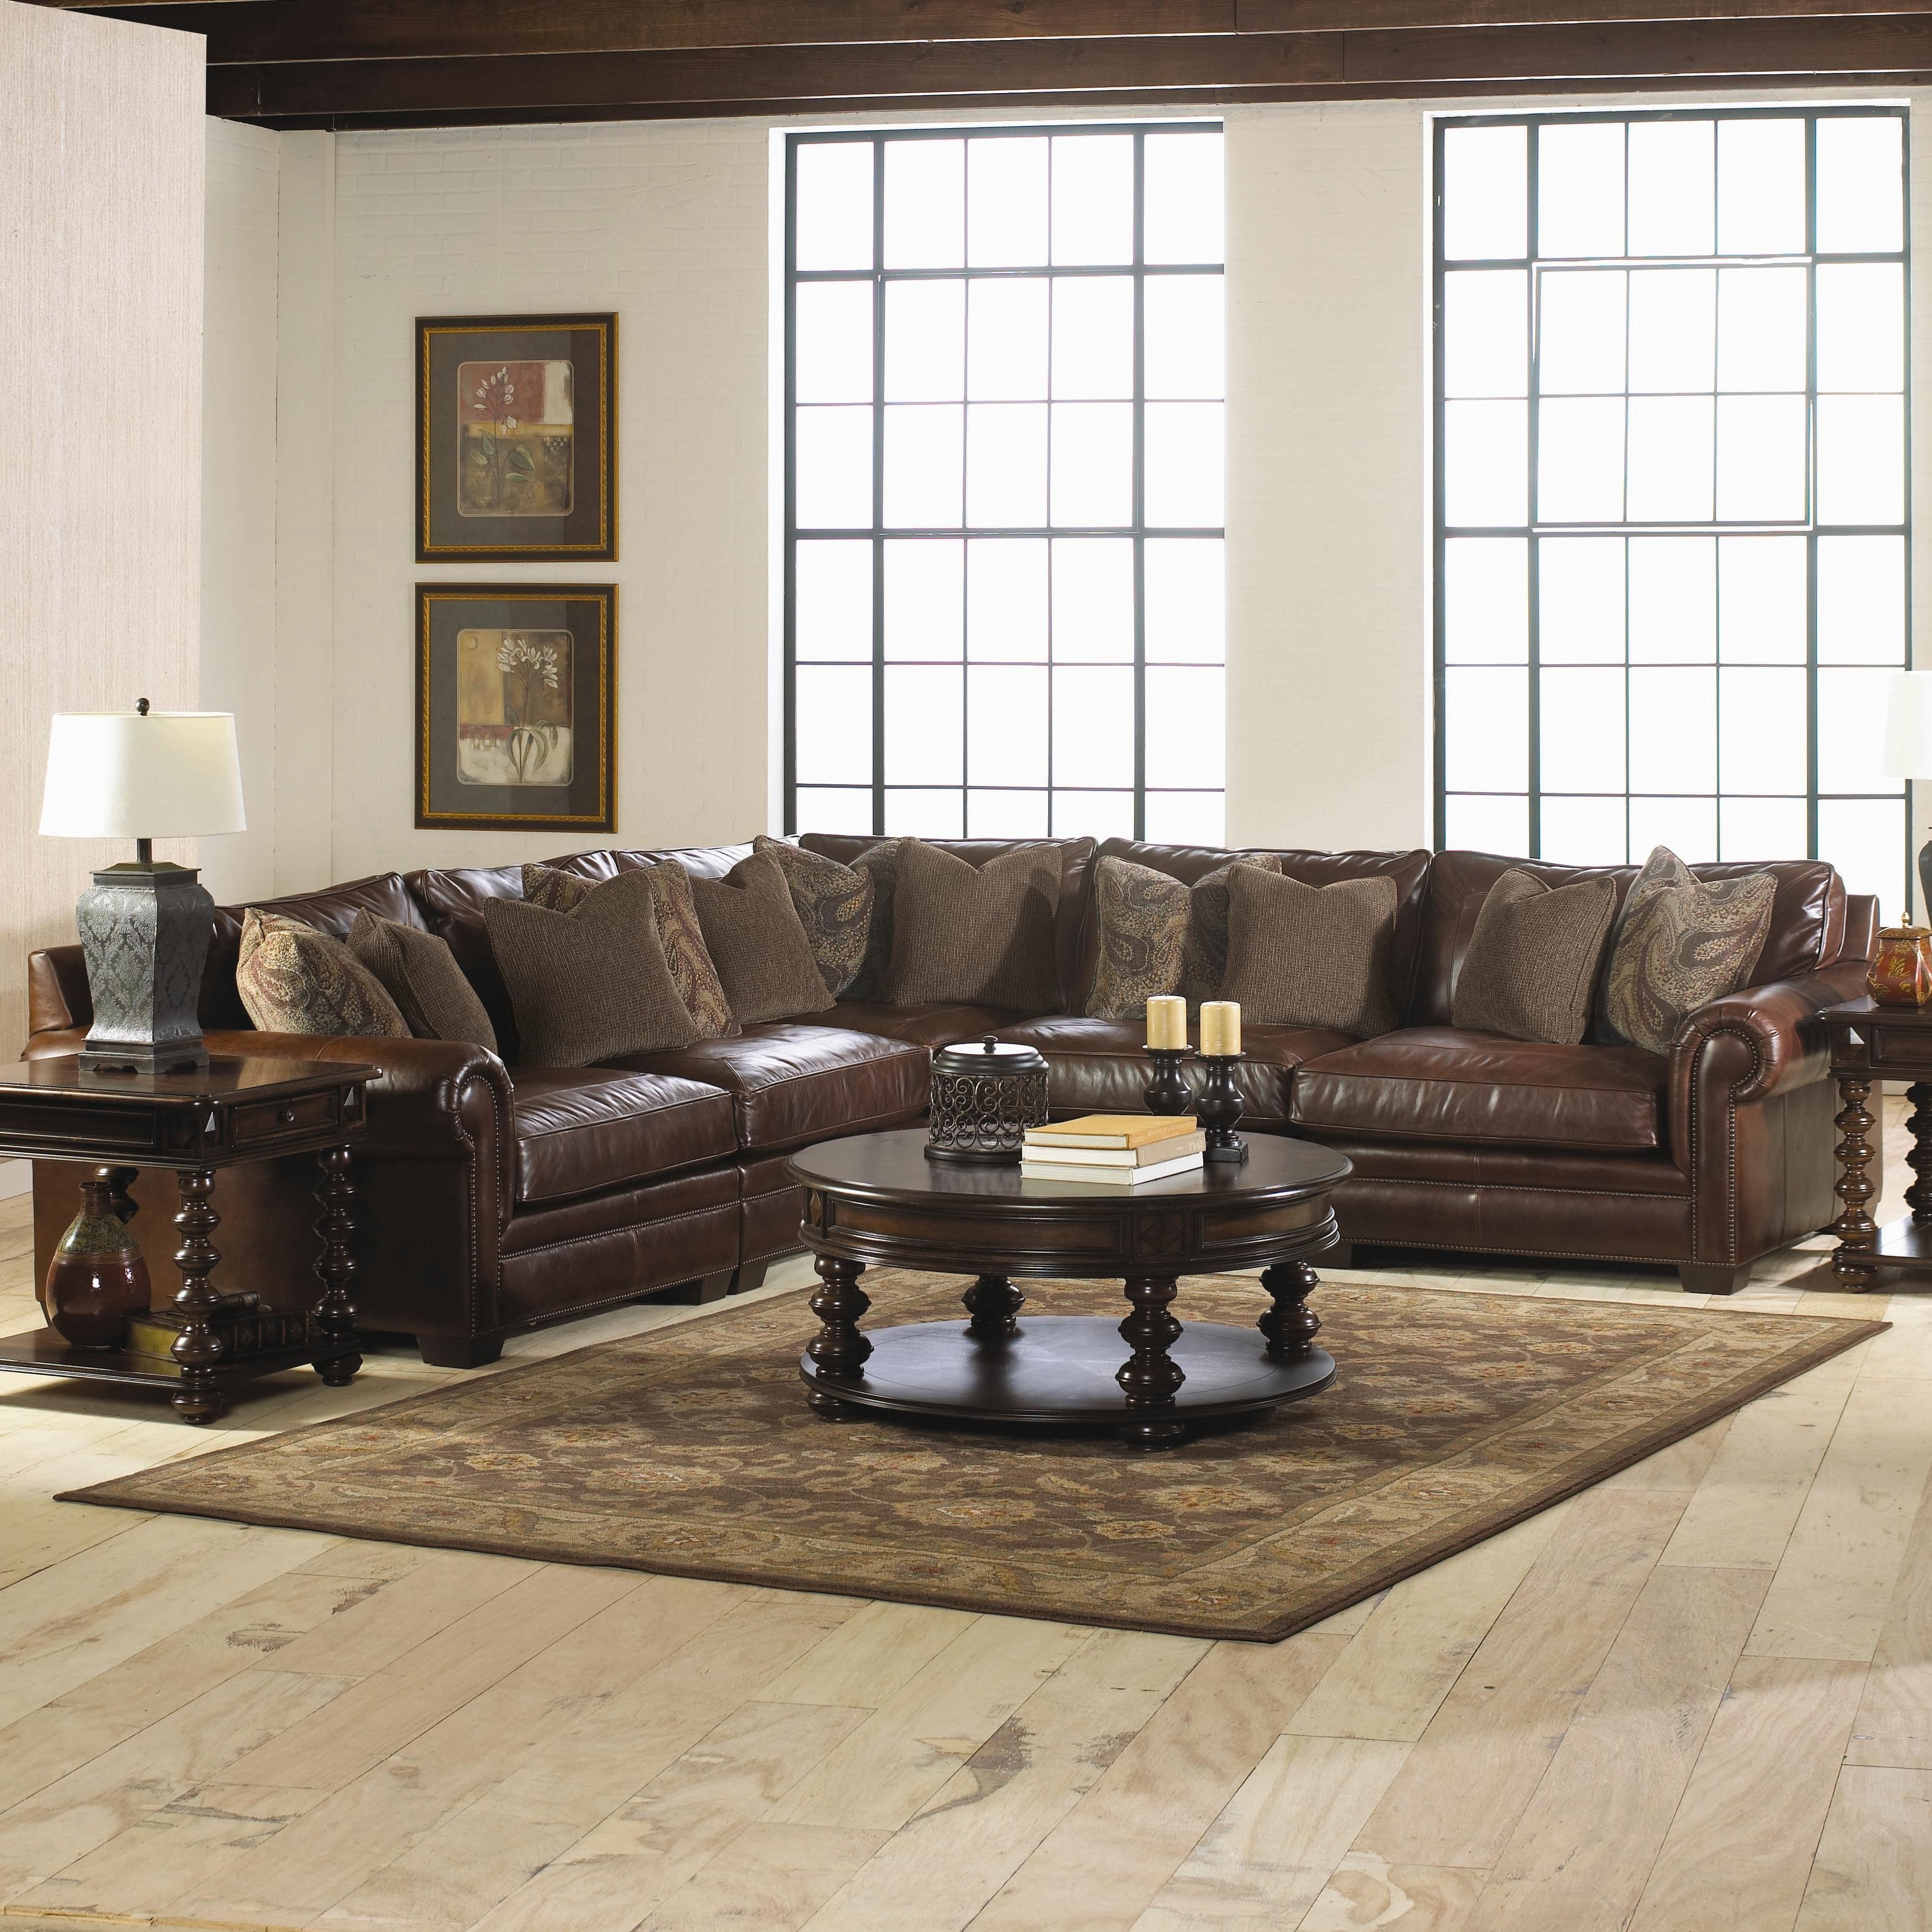 Newest Furniture & Sofa: Glamorous Interior Furniture Designhavertys In Sectional Sofas In Charlotte Nc (View 16 of 20)